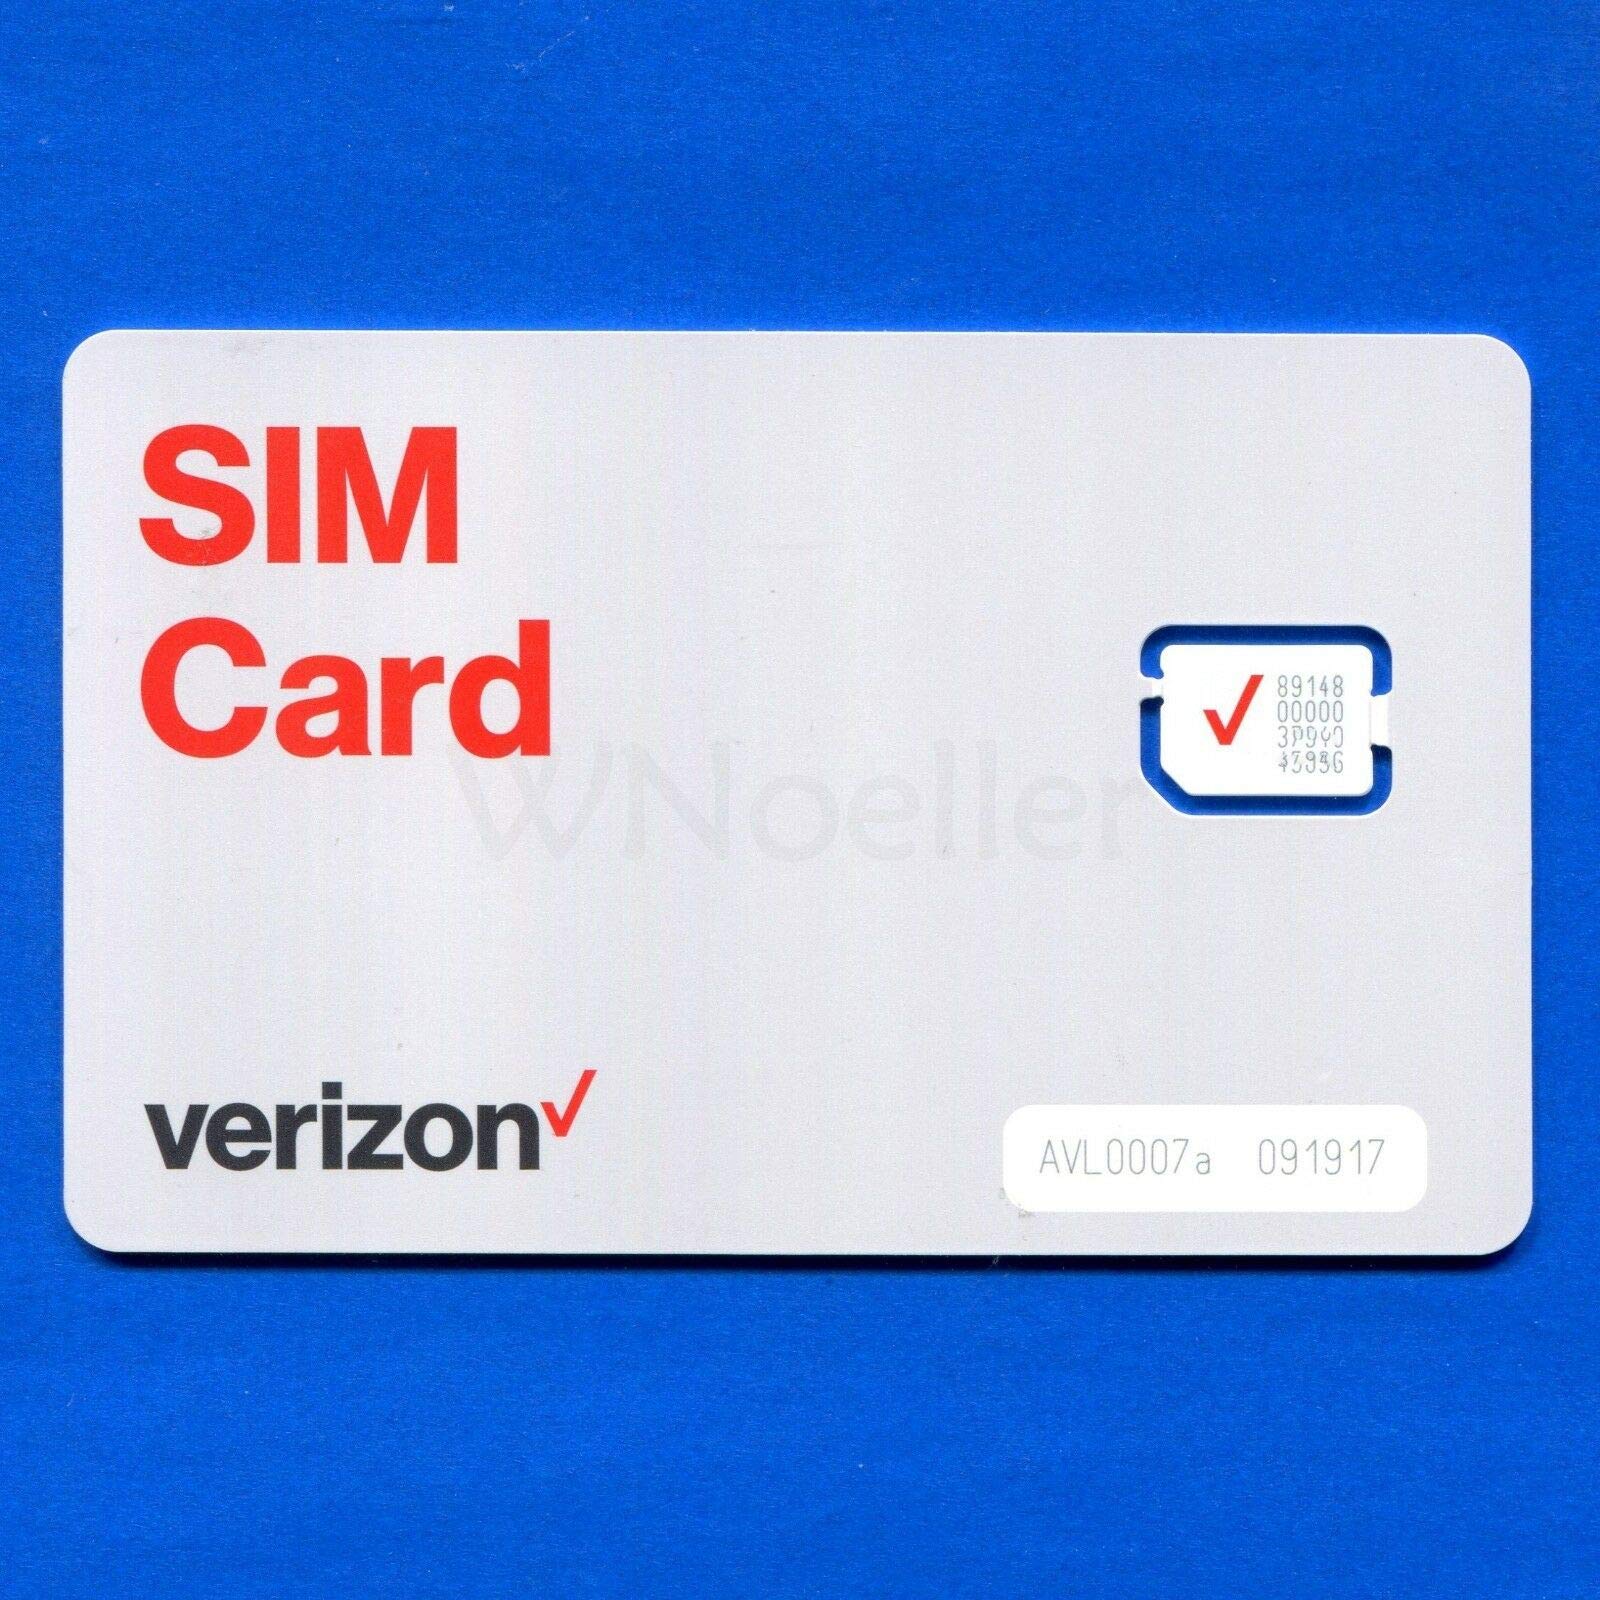 Resolving “SIM Card Is Not From Verizon” Message